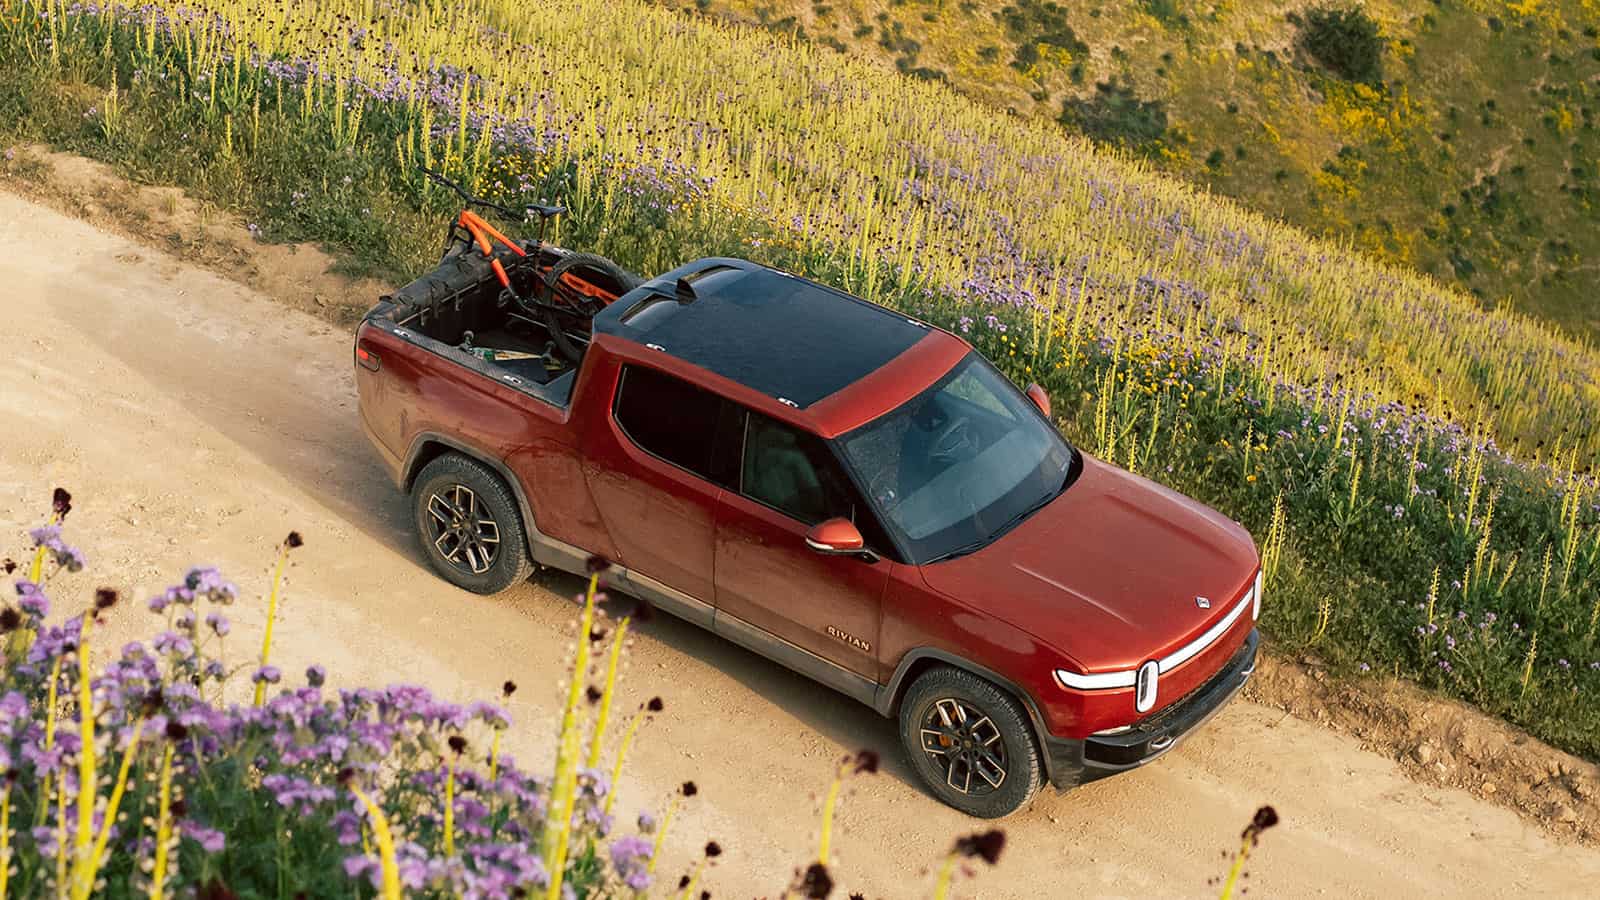 Rivian R1T on dirt road with wildflowers